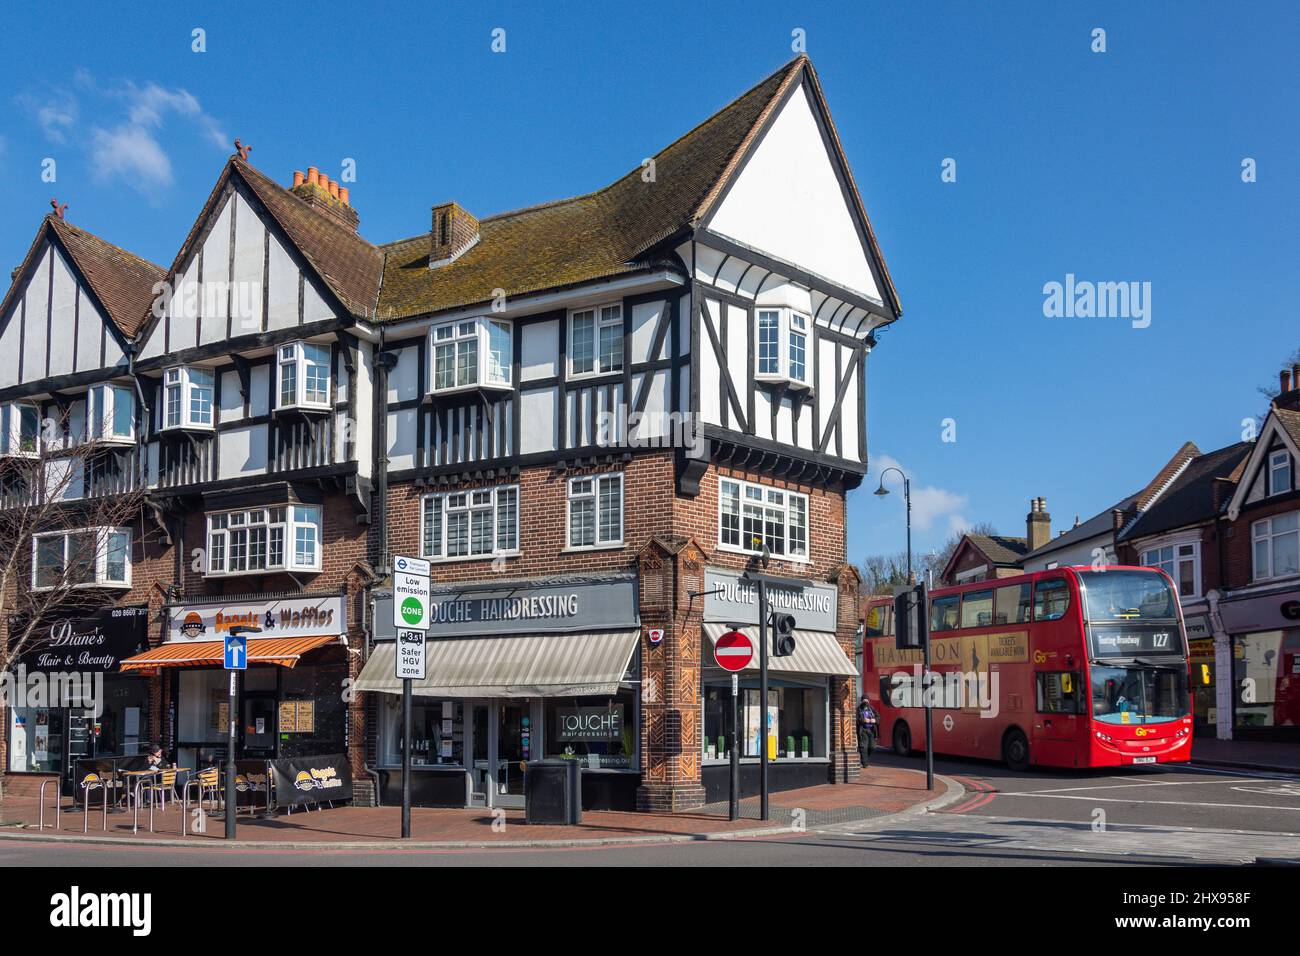 Corner of Whyteleafe South Road and High Street, Purley, London Borough of Croydon, Greater London, England, United Kingdom Stock Photo